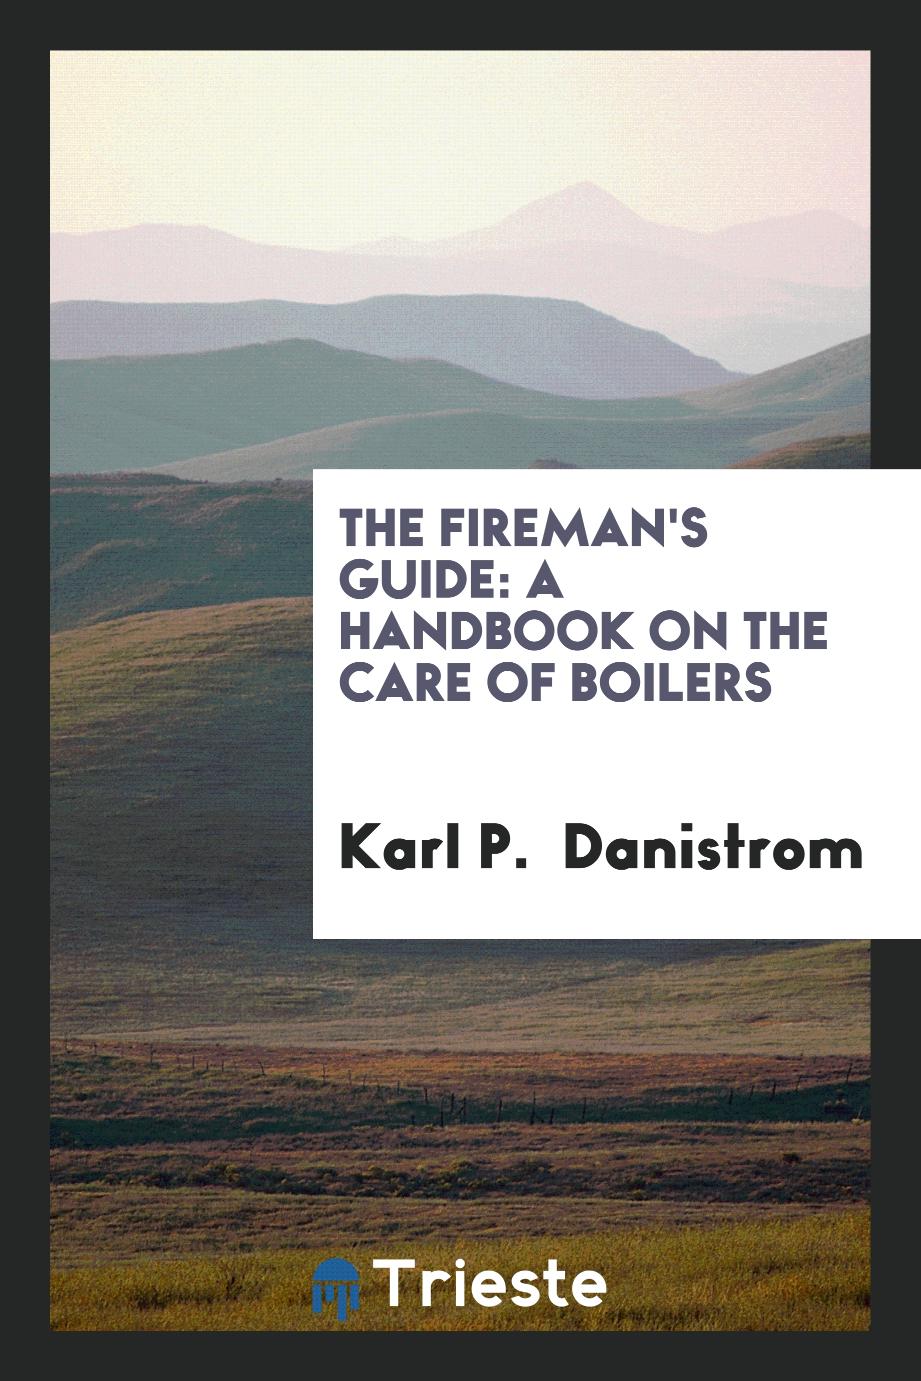 The fireman's guide: A handbook on the care of boilers